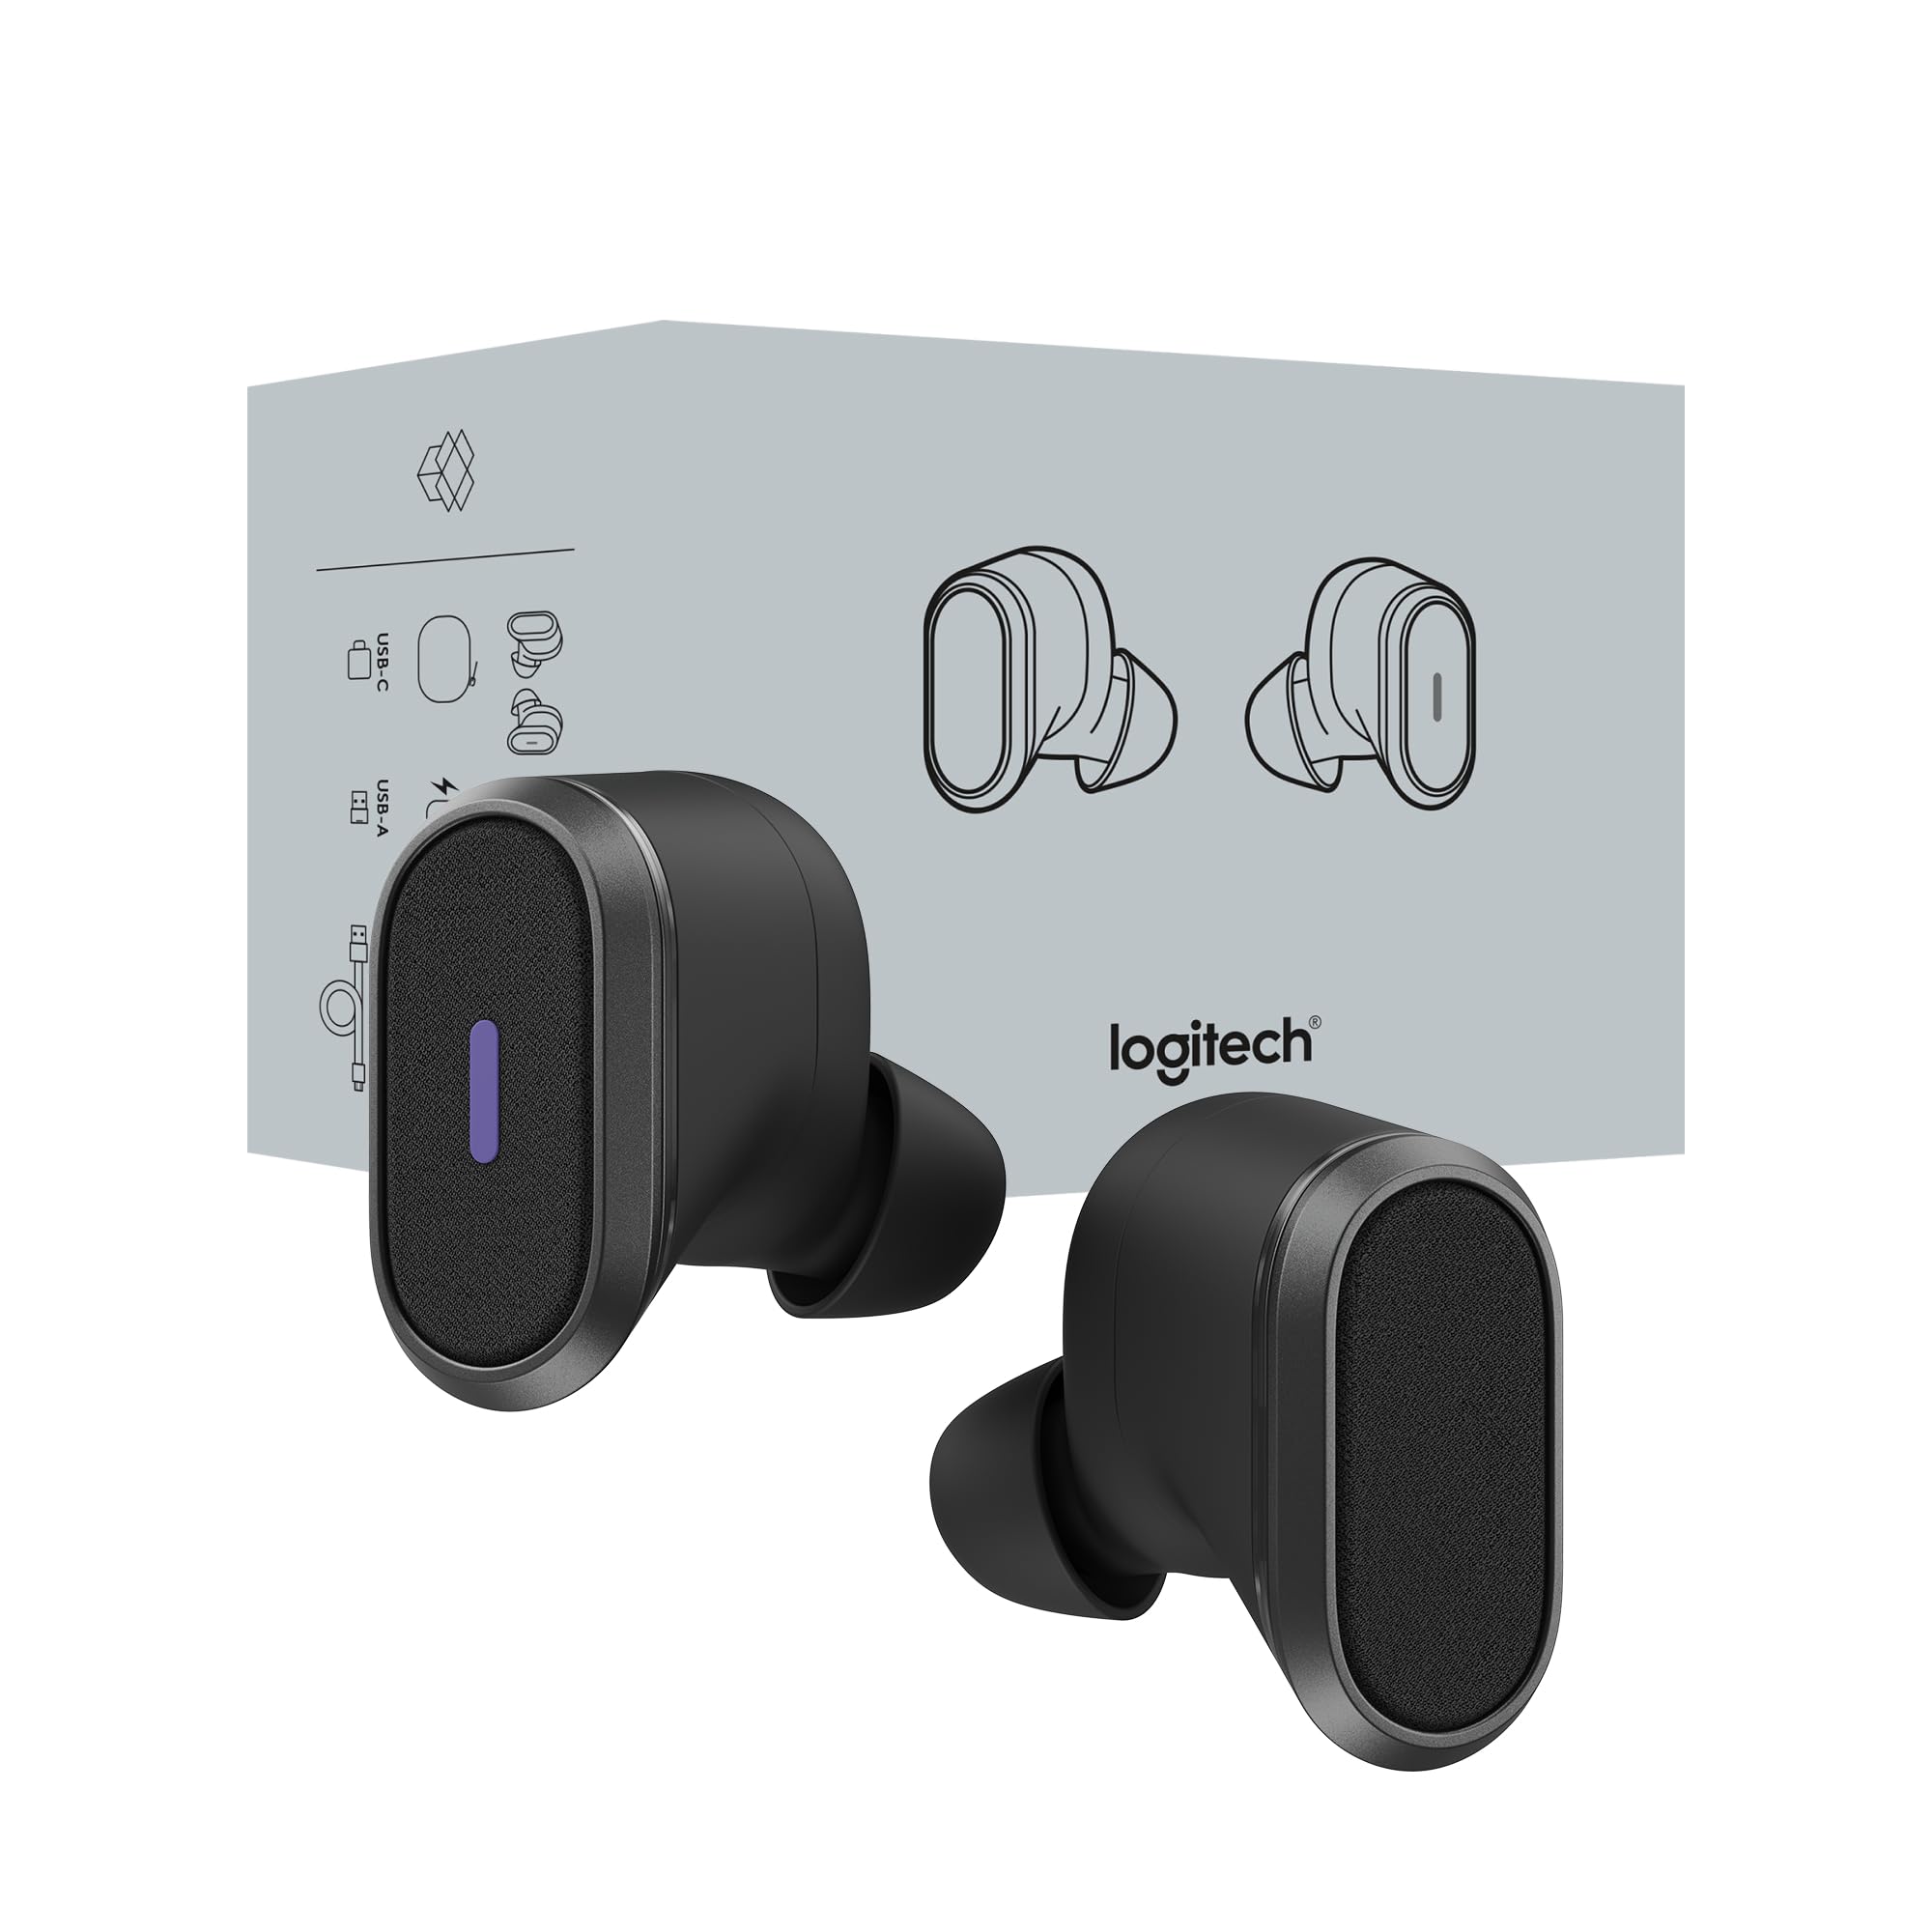 Logitech Zone True Wireless Bluetooth Noise Canceling Earbuds with Microphone, Hybrid ANC, Transparency Mode, Certified for Microsoft Teams, Zoom, Google Meet, Google Voice - Graphite